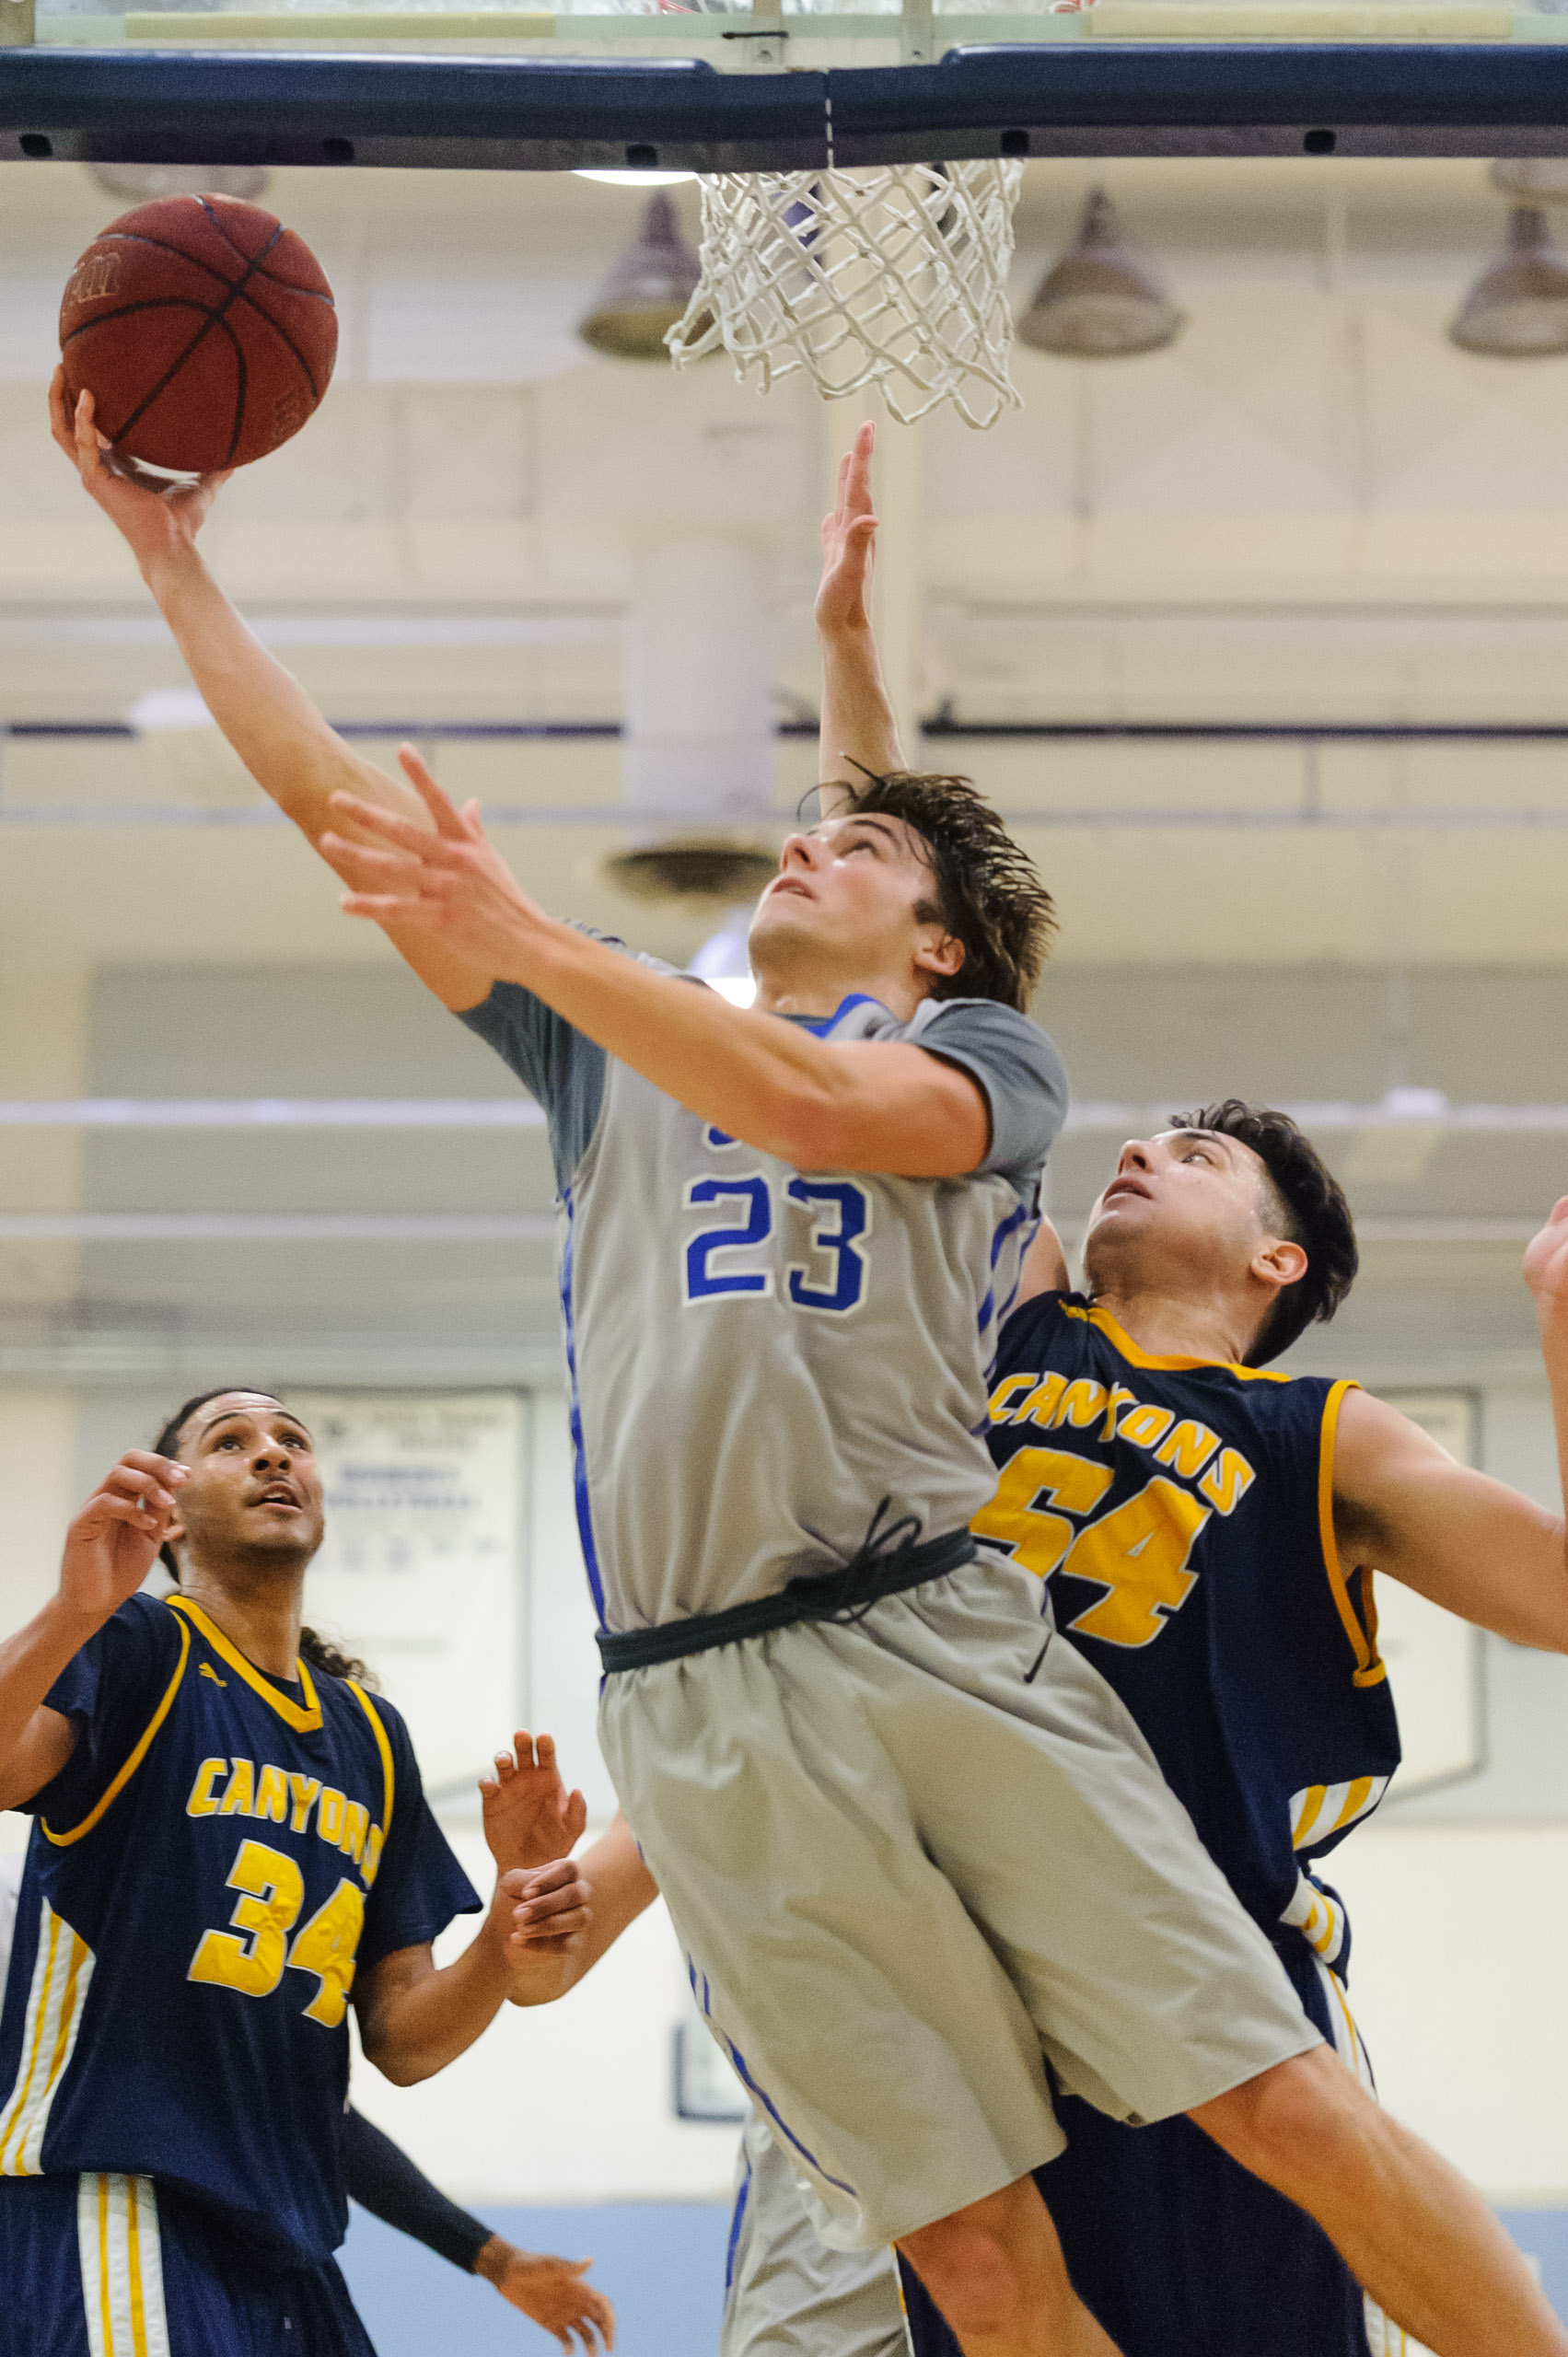  Forward Dayne Downey (23,Middle) of Santa Monica College goes up for a reverse layup while guarded by Anthony Simone (54,Right) of the College of the Canyons. The Santa Monica College Corsairs lose the game 74-72 to the College of the Canyons Cougar